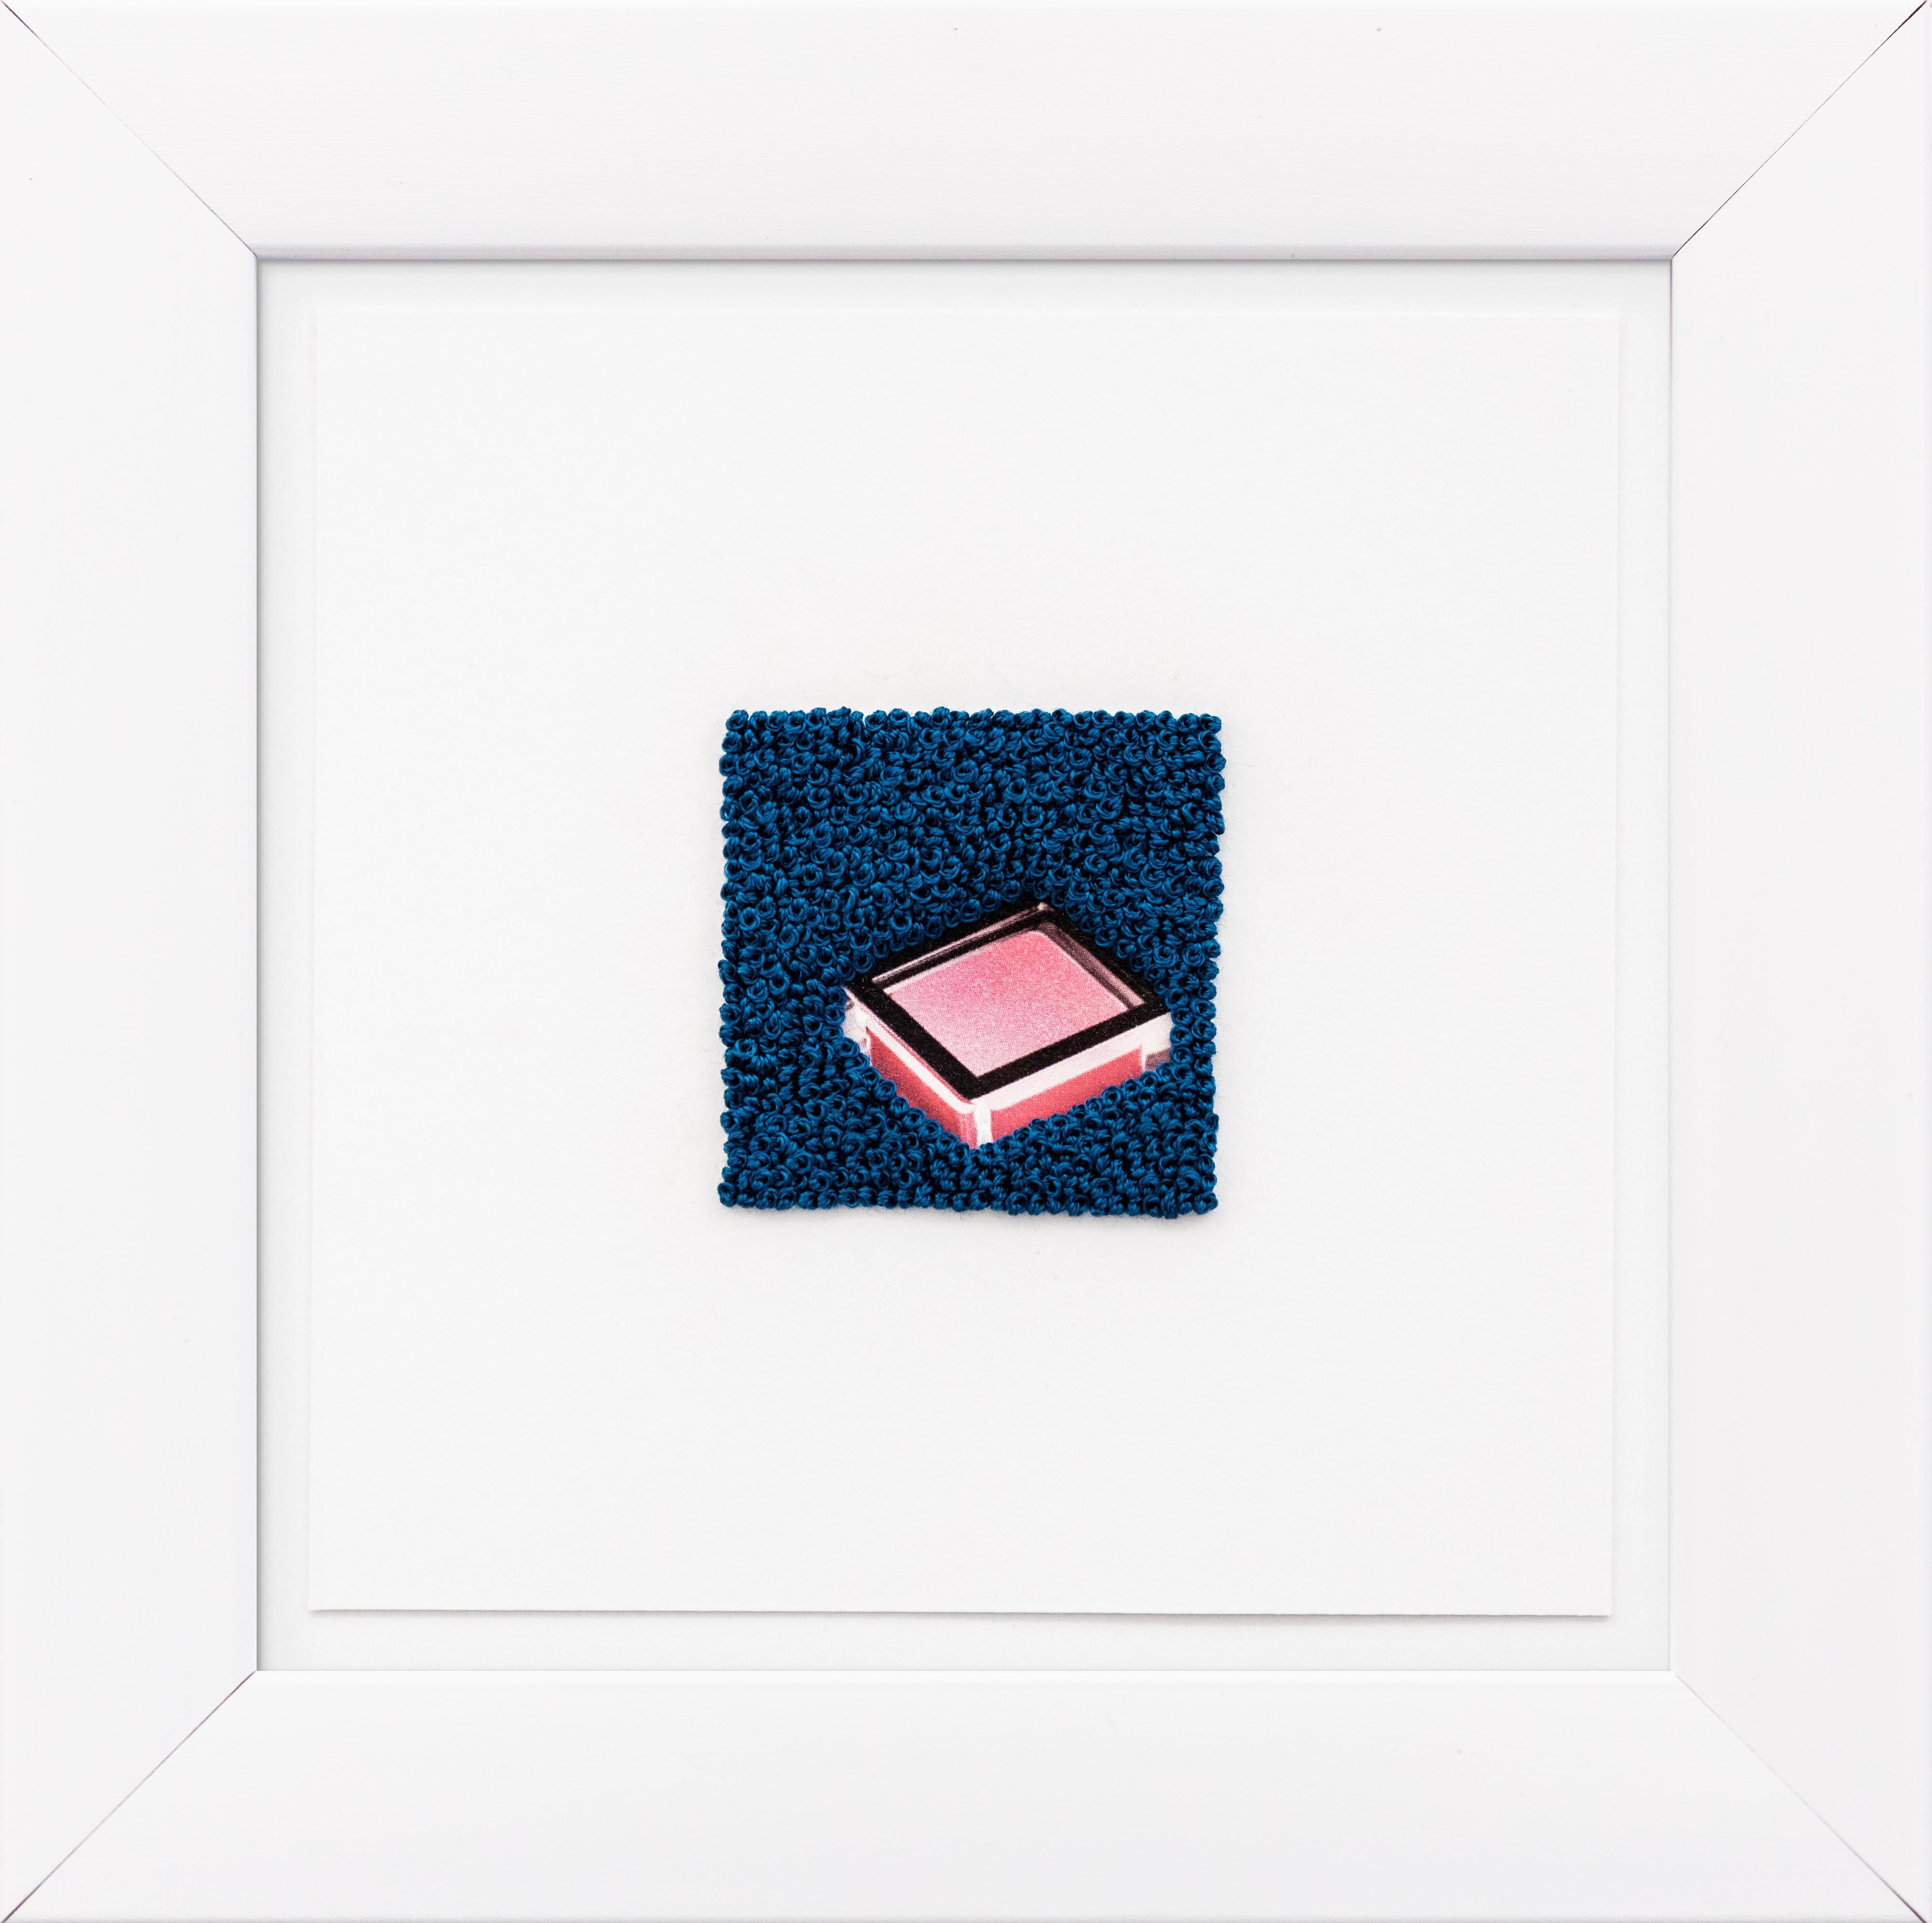 "Pink Me Up" paper collage, hand-embroidery, french knot, blue and pink